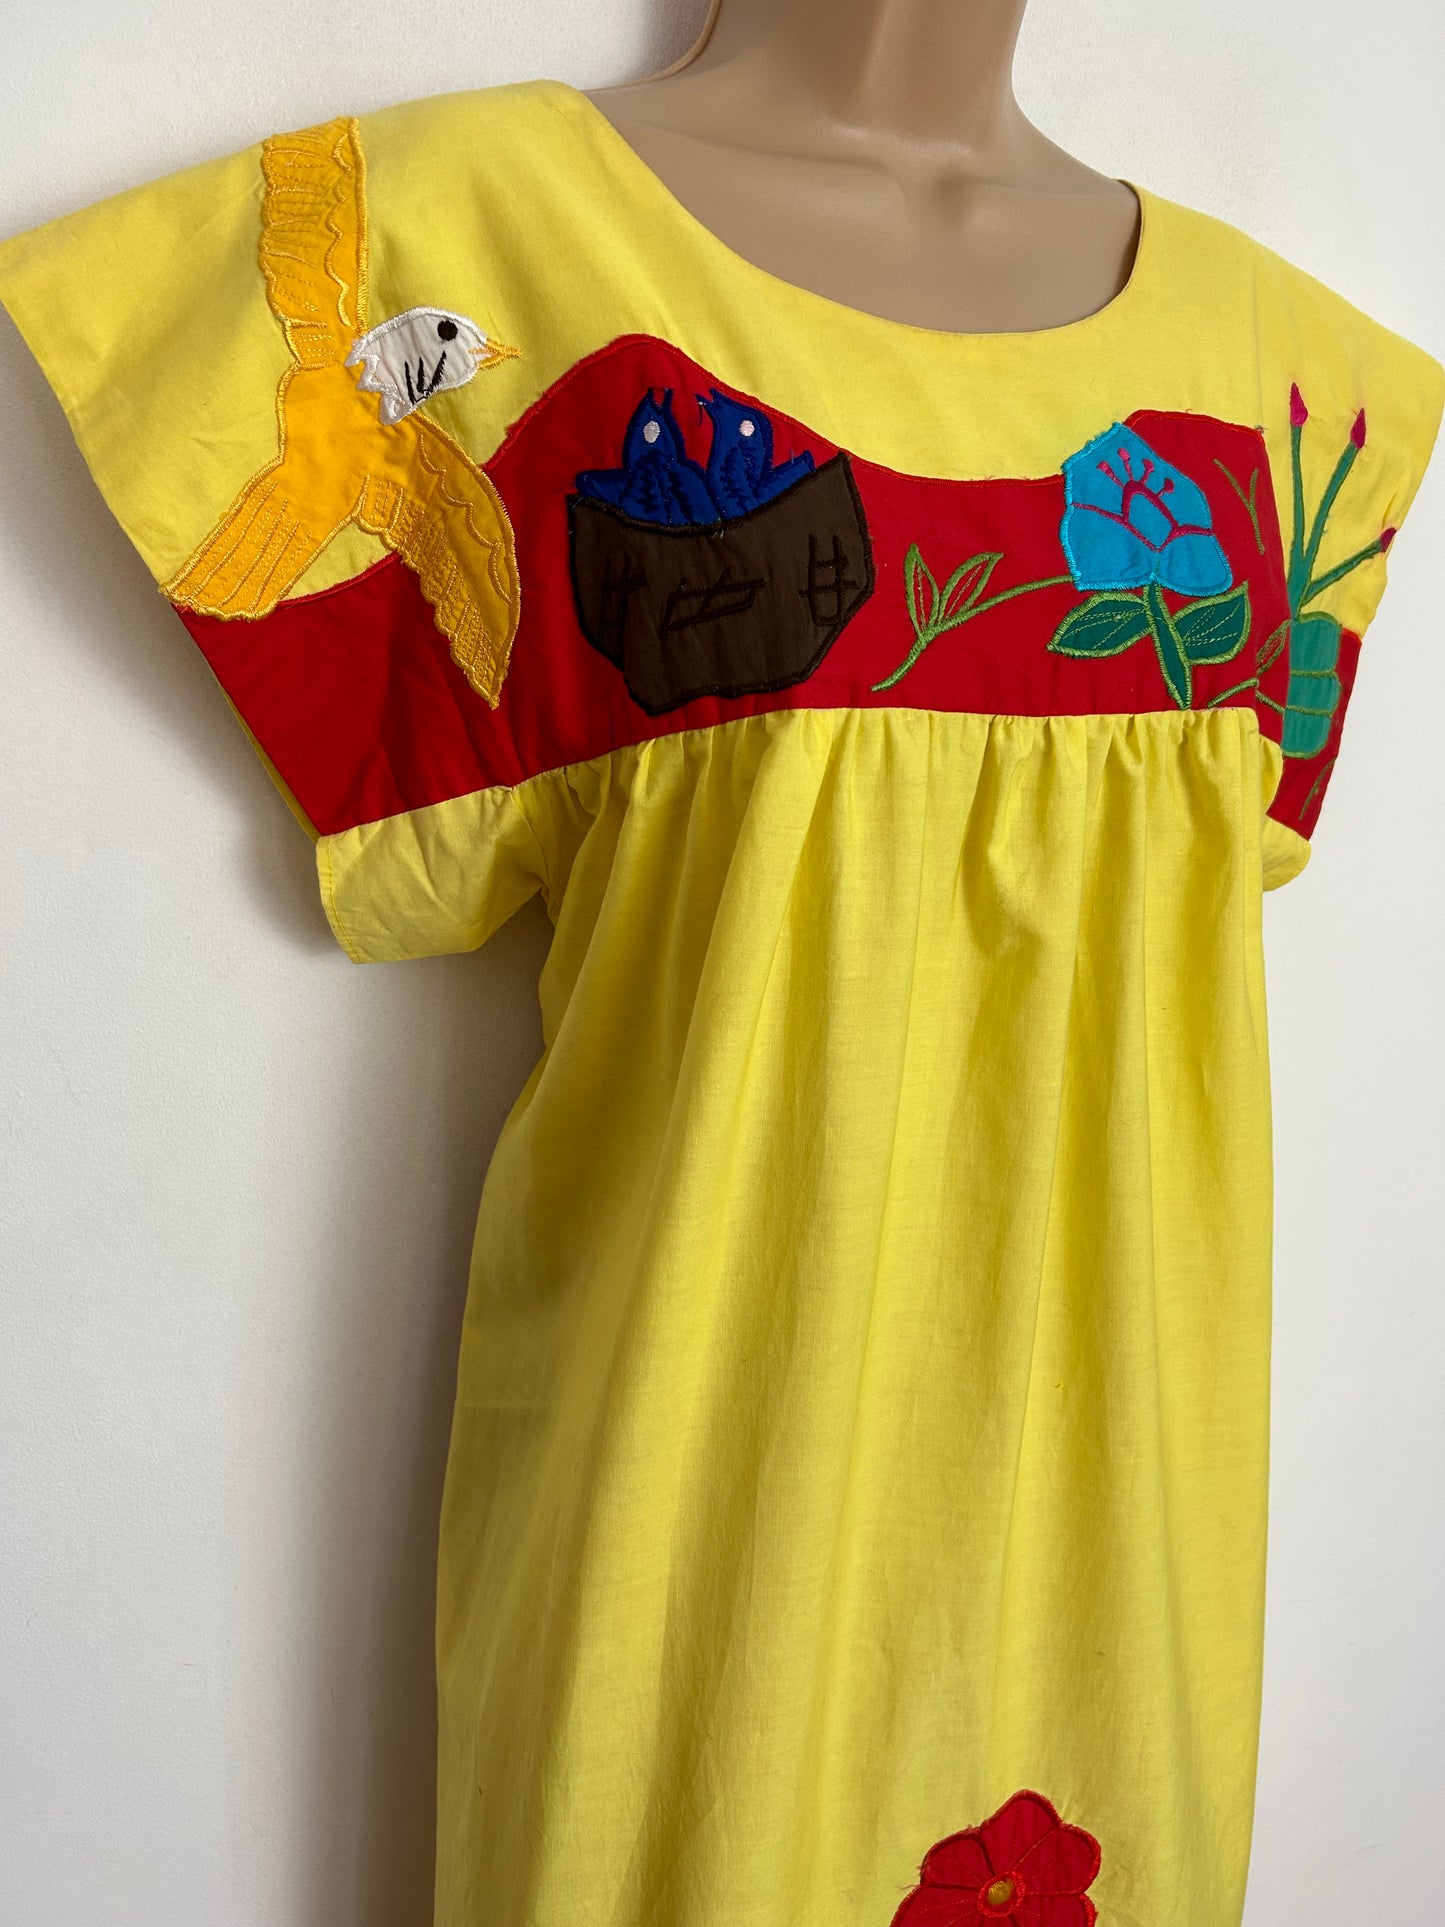 Vintage 1970s Up To Size 14 Mexican Oaxacan Yellow Flowers Cactus & Birds Applique Detail Short Sleeve Cotton Tunic Style Kaftan Smock Hippy Dress